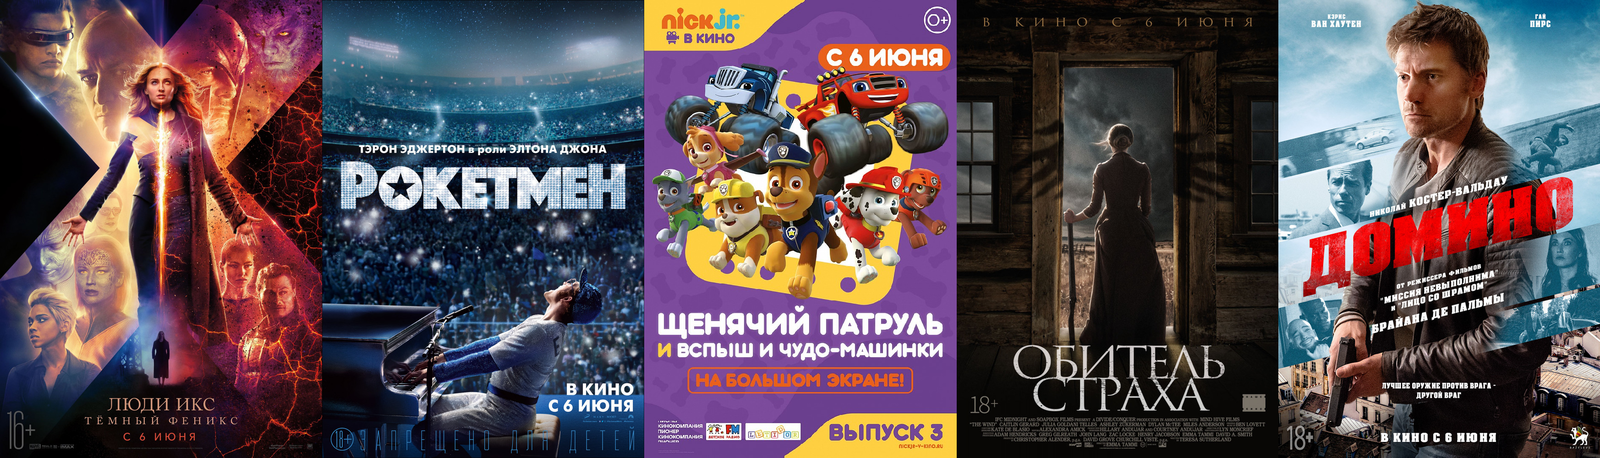 Russian box office receipts and distribution of screenings over the past weekend (June 6 - 9) - Movies, Box office fees, Film distribution, , Rocketman